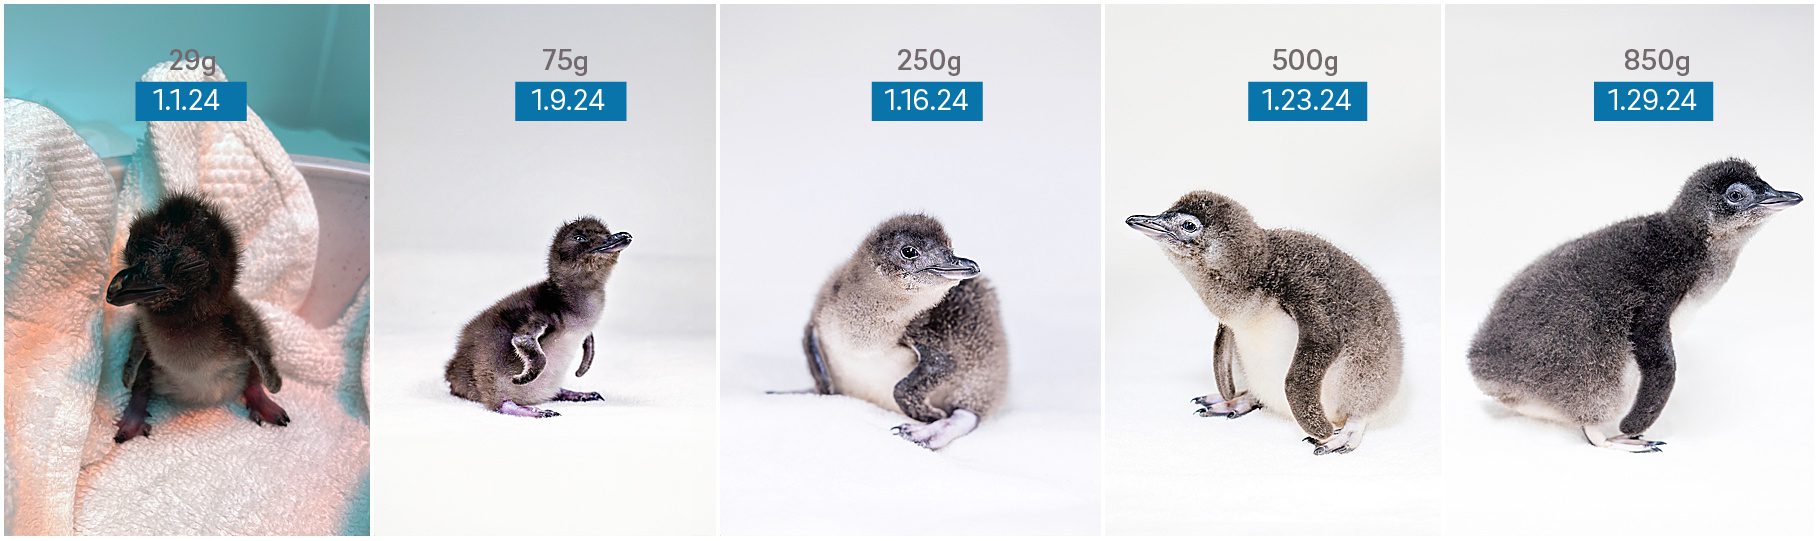 progression of newly hatched little blue penguin from being freshly hatched to a slightly bigger fuzzy baby at 850g